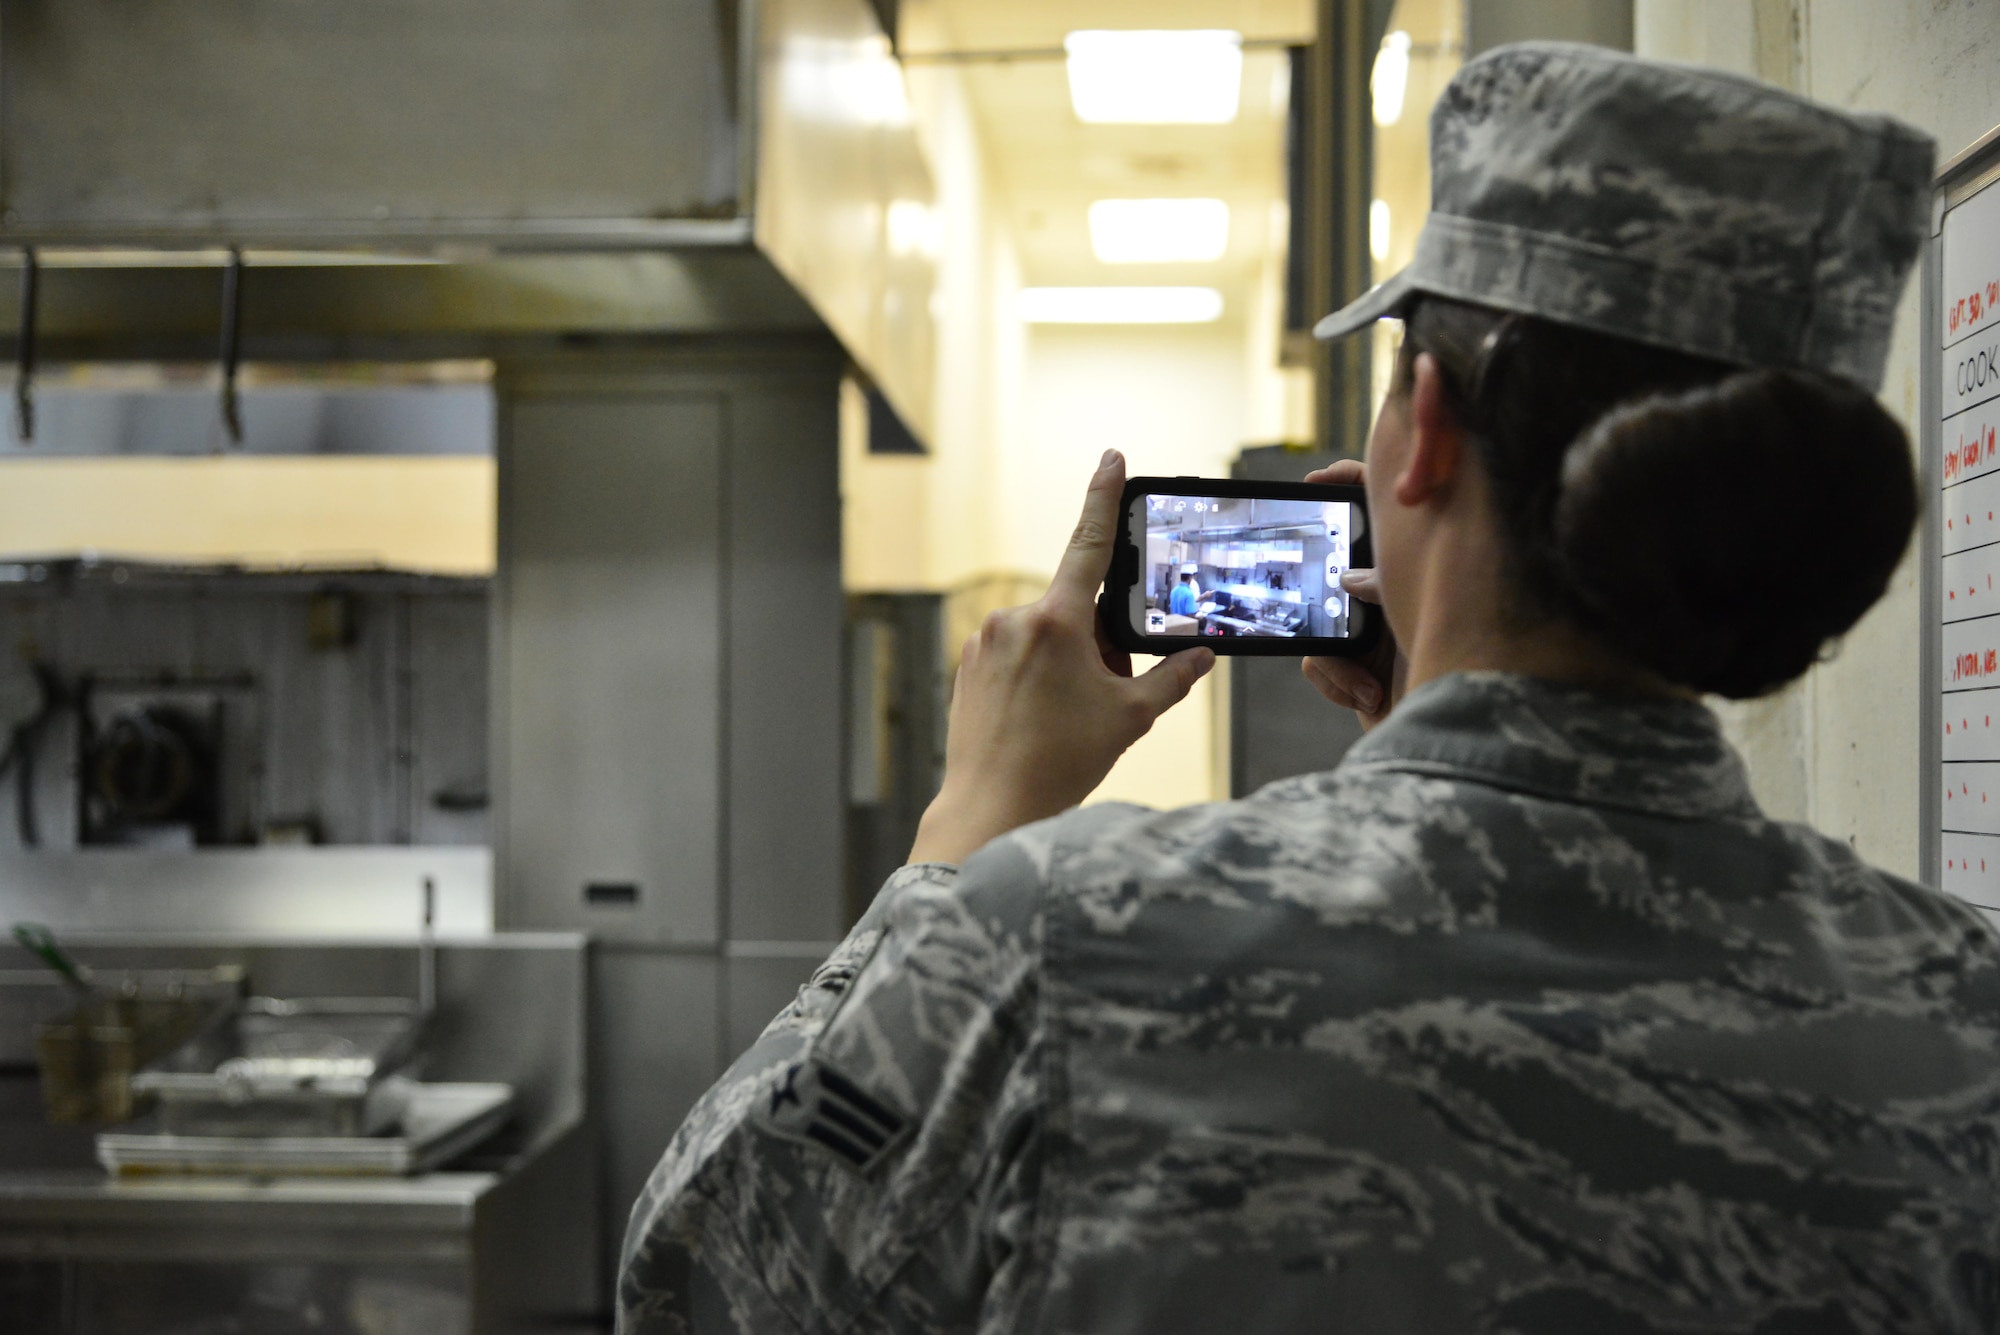 Senior Airman Leah Smith, 379th Expeditionary Medical Operations Support Squadron Bioenvironmental, captures photographic logs of a dining facility ventilation system being tested for air flow to meet Occupational Safety and Health Administration standards September 30, 2015 at Al Udeid Air Base, Qatar. (U.S. Air Force photo/Staff Sgt. Alexandre Montes)  